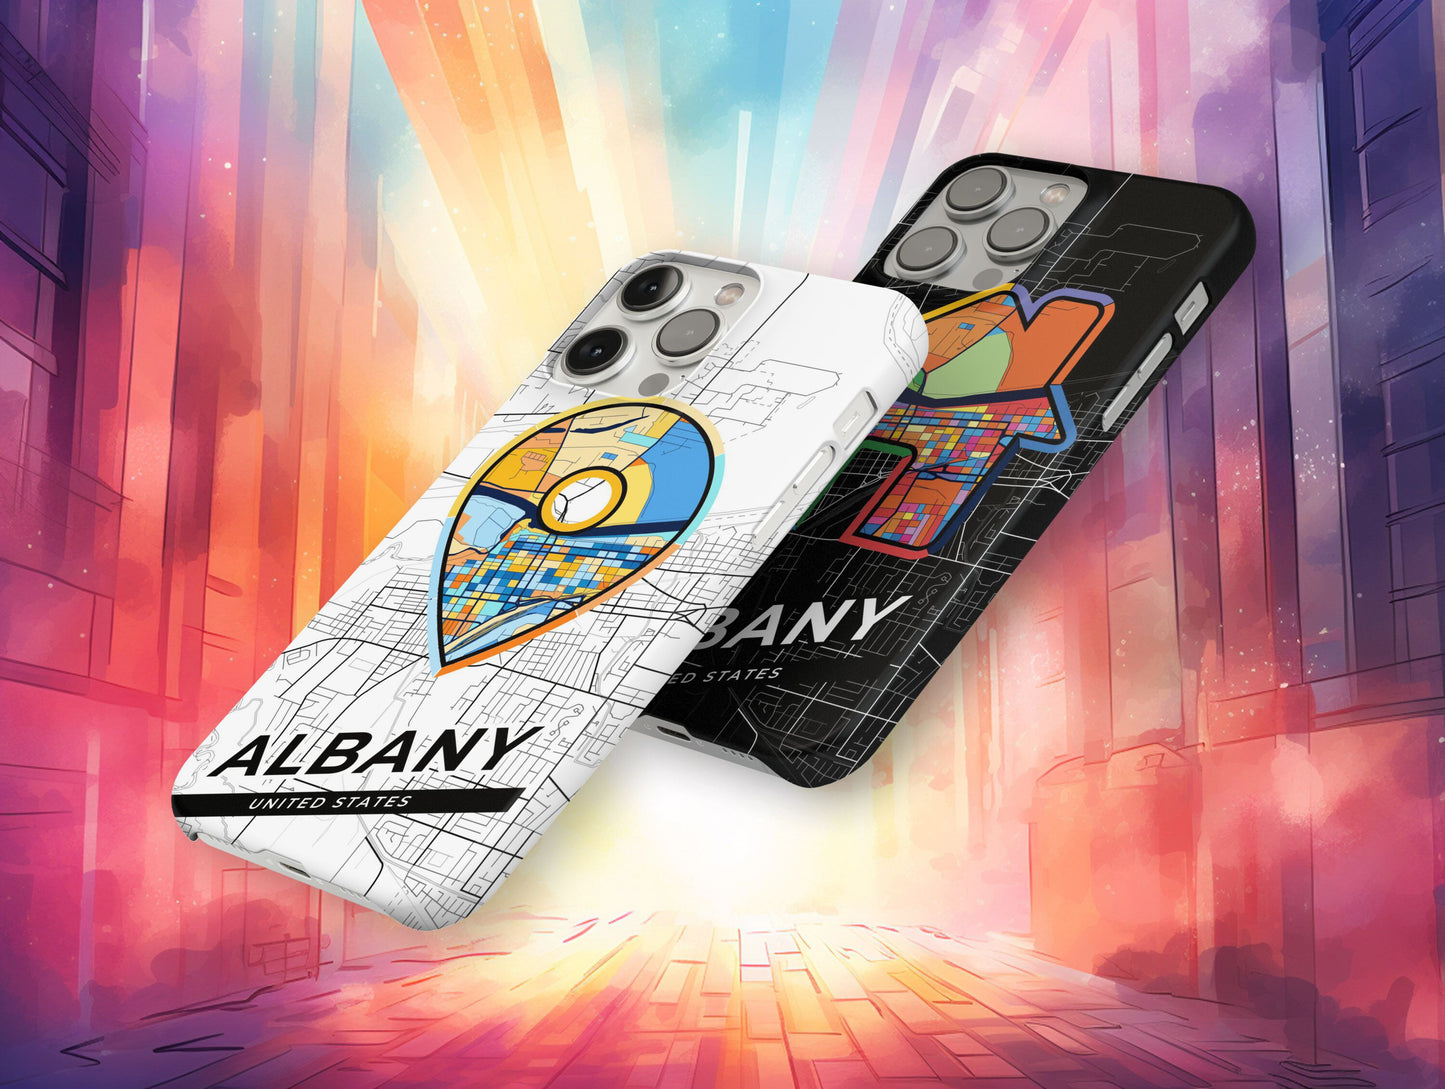 Albany Oregon slim phone case with colorful icon. Birthday, wedding or housewarming gift. Couple match cases.